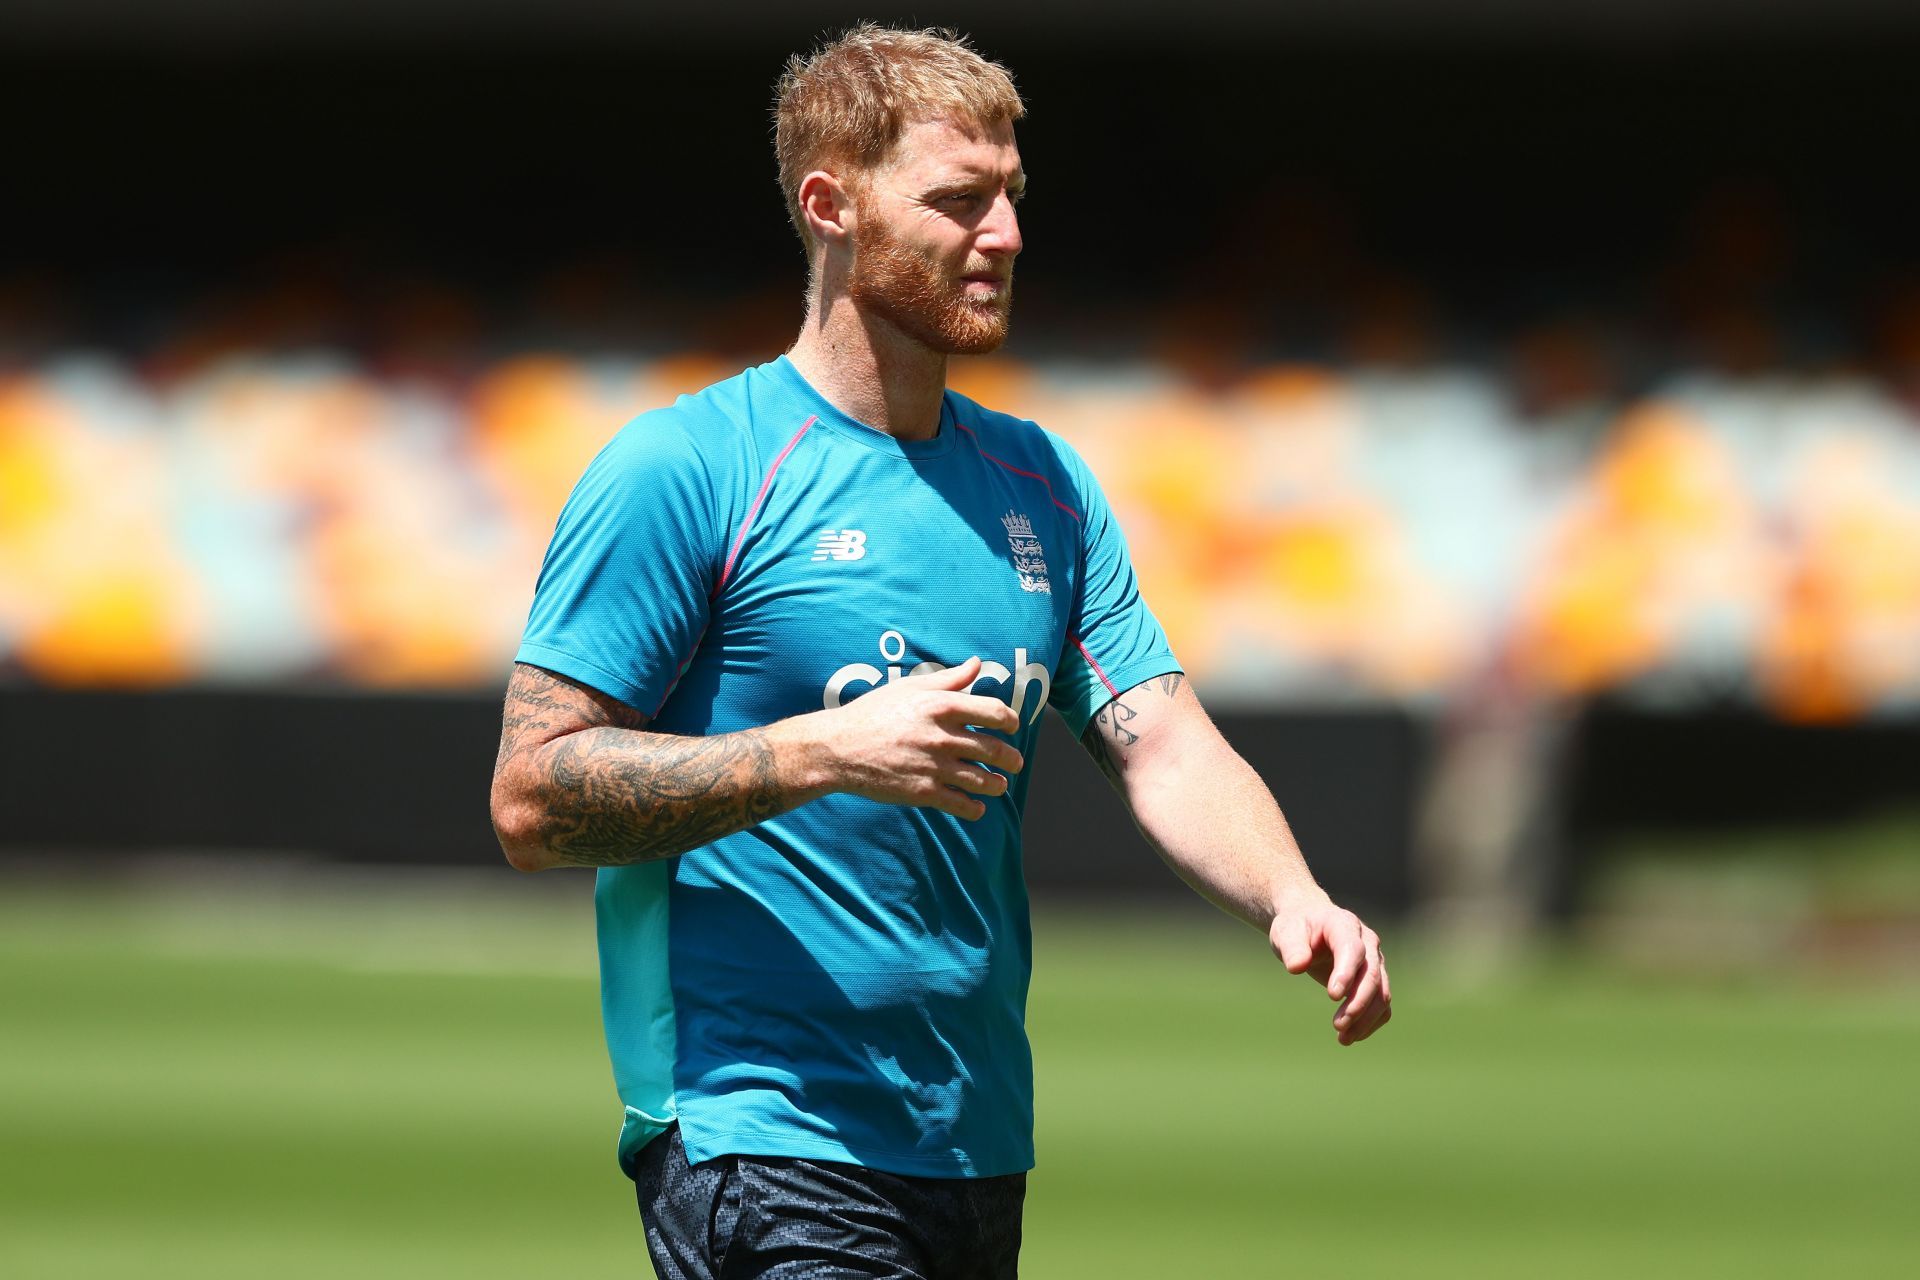 Stokes last played a competitive game in July (Credit: Getty Images)